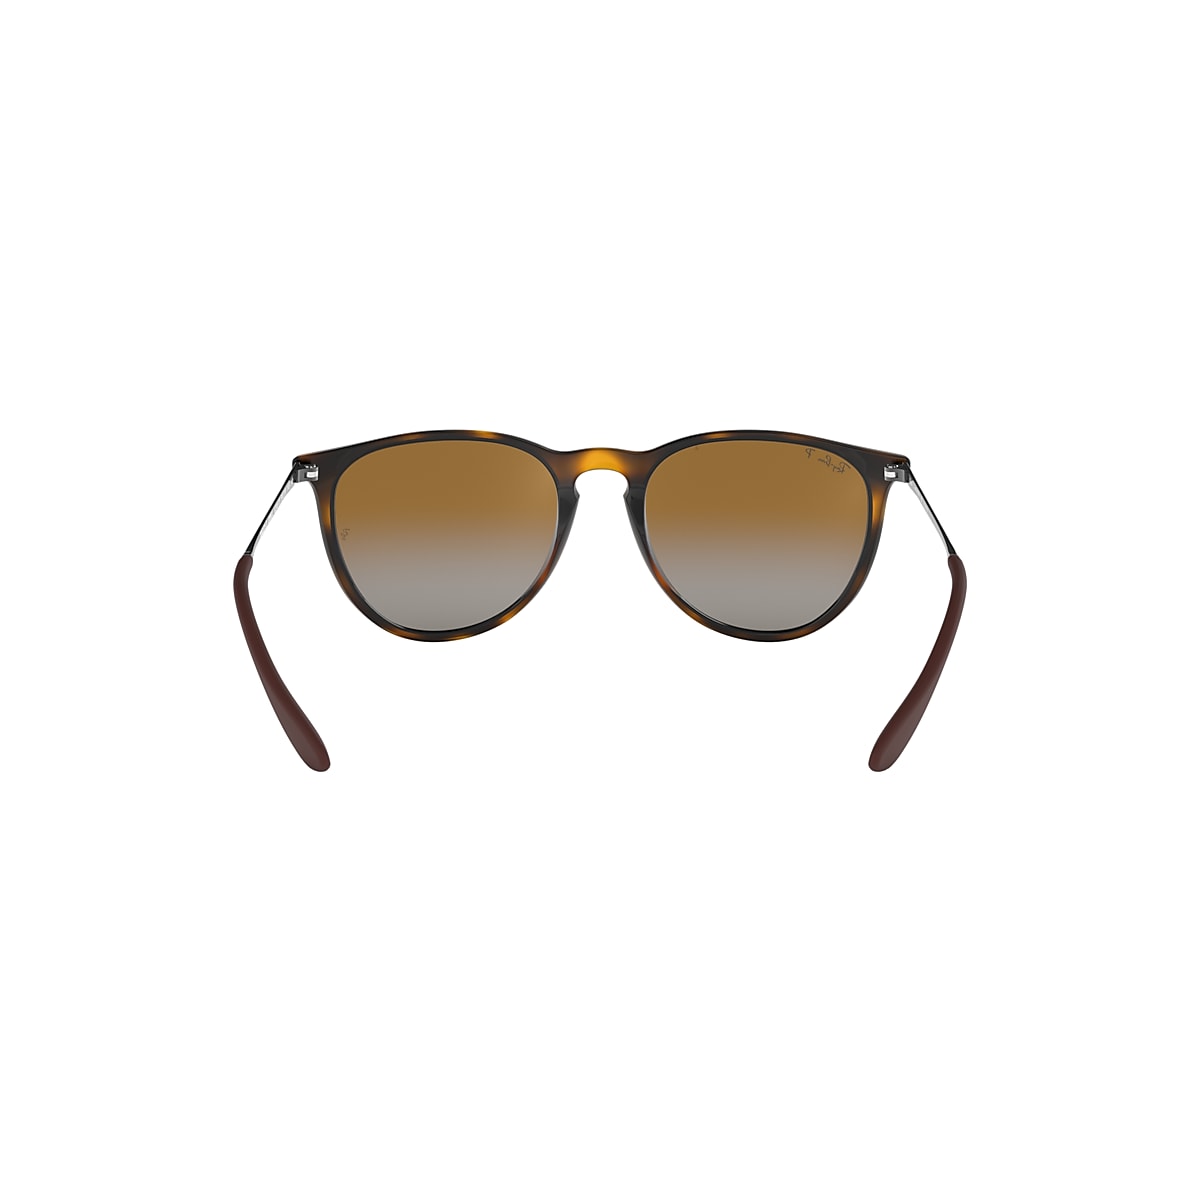 ERIKA CLASSIC Sunglasses in Light Havana and Brown - RB4171F 